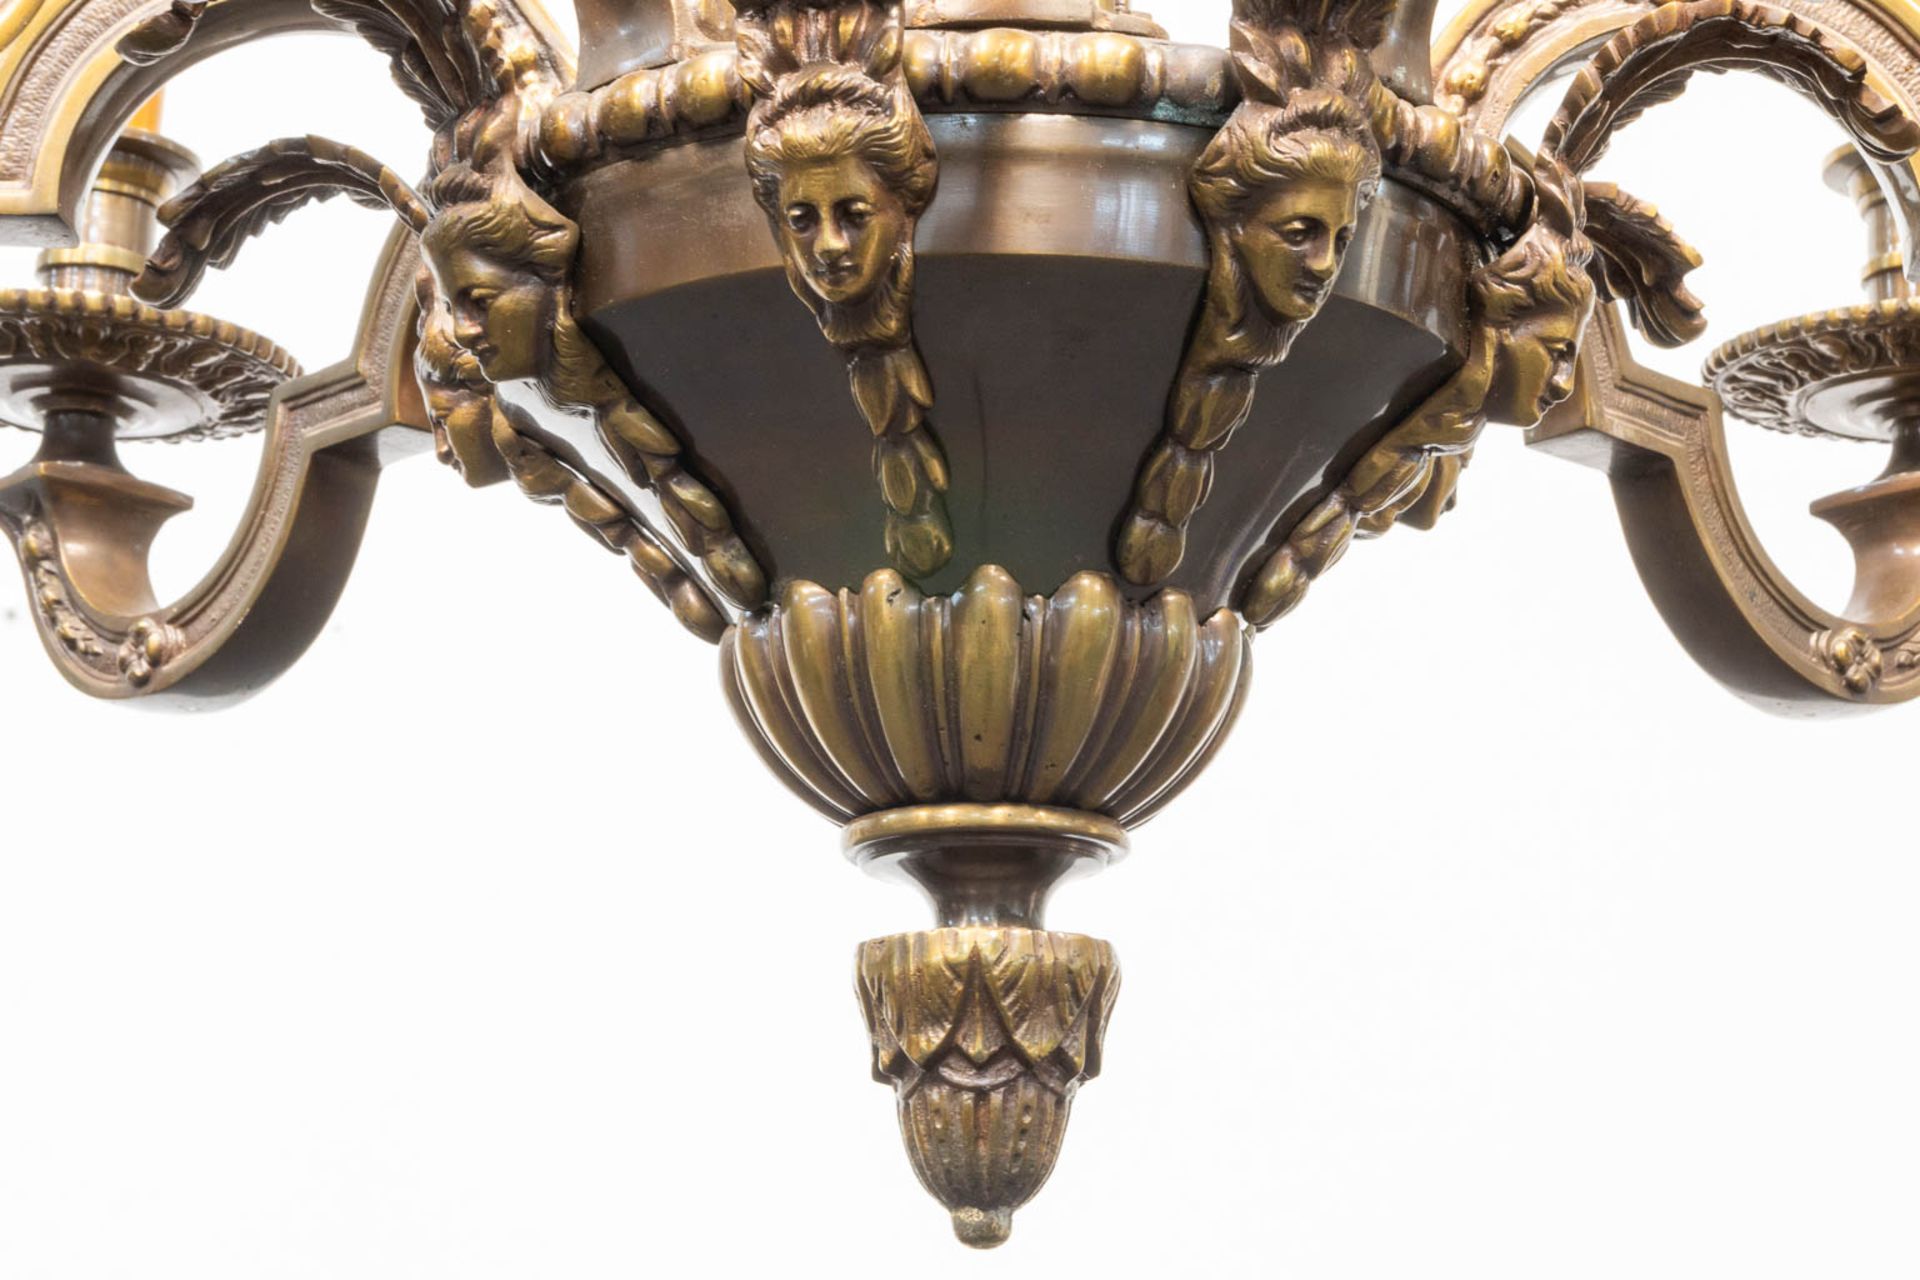 A bronze Mazarin Chandelier with 8 points of light. - Image 7 of 15